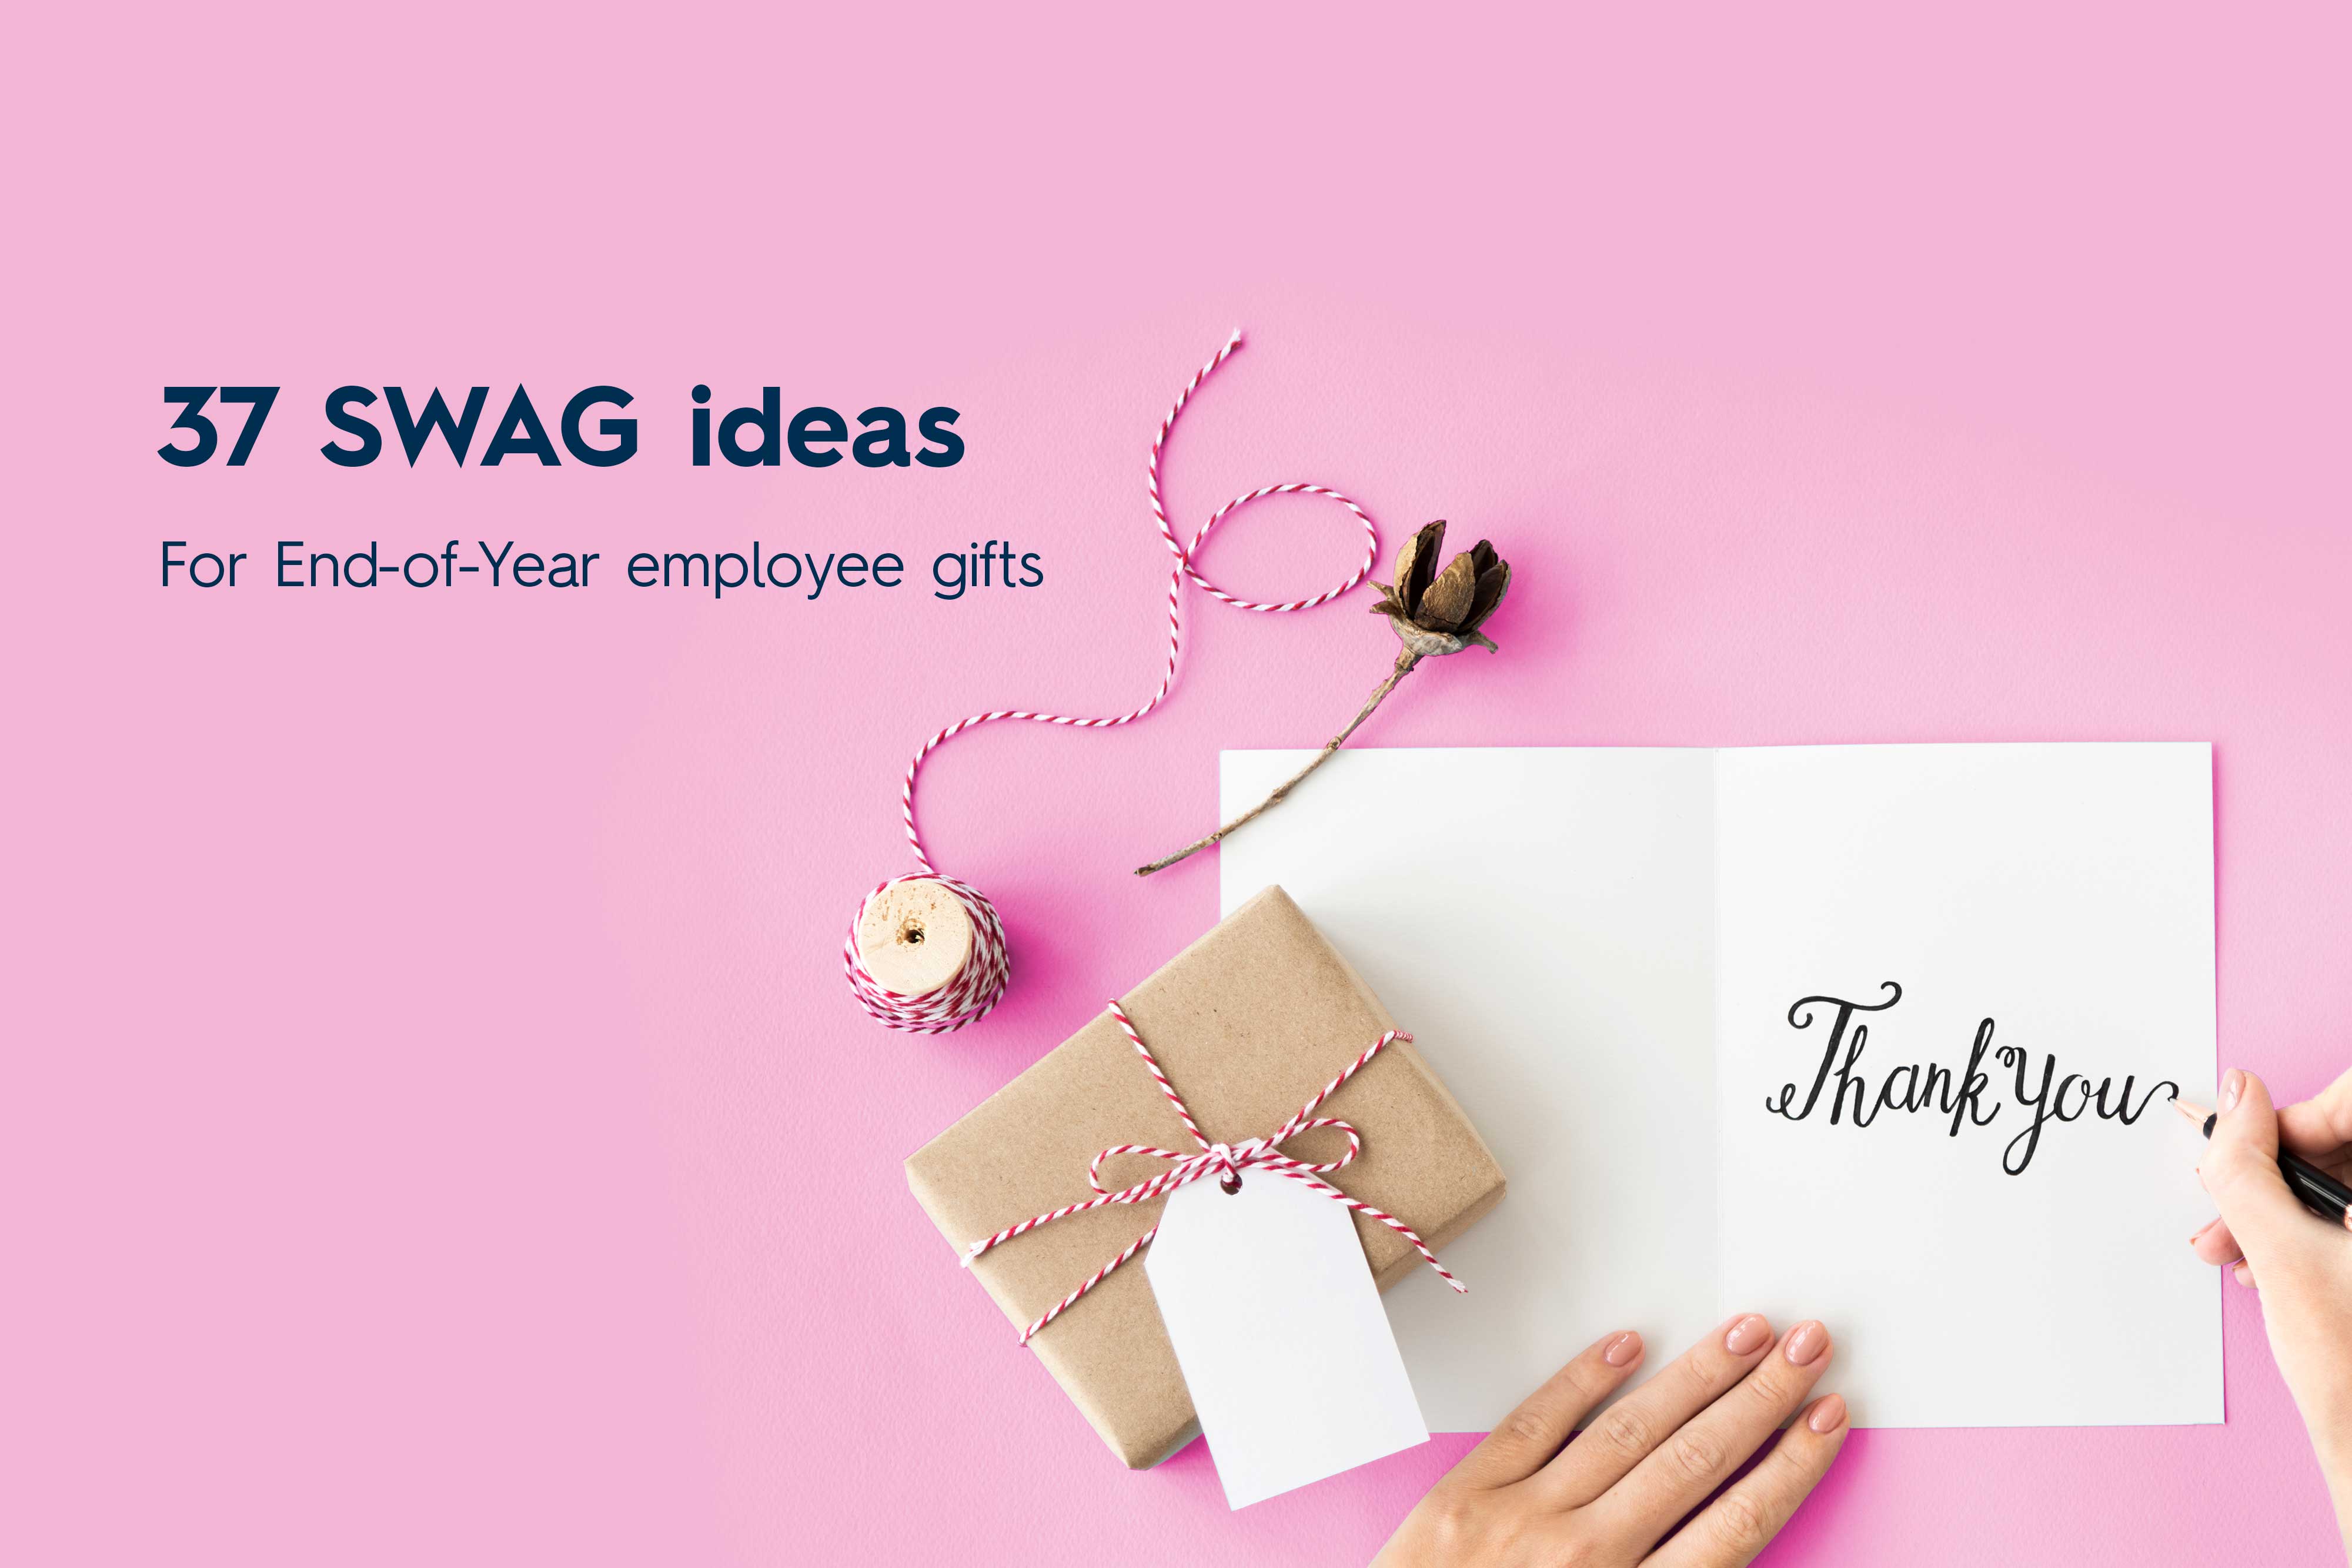 37-SWAG-ideas_End-of-Year-Employee-Gifts